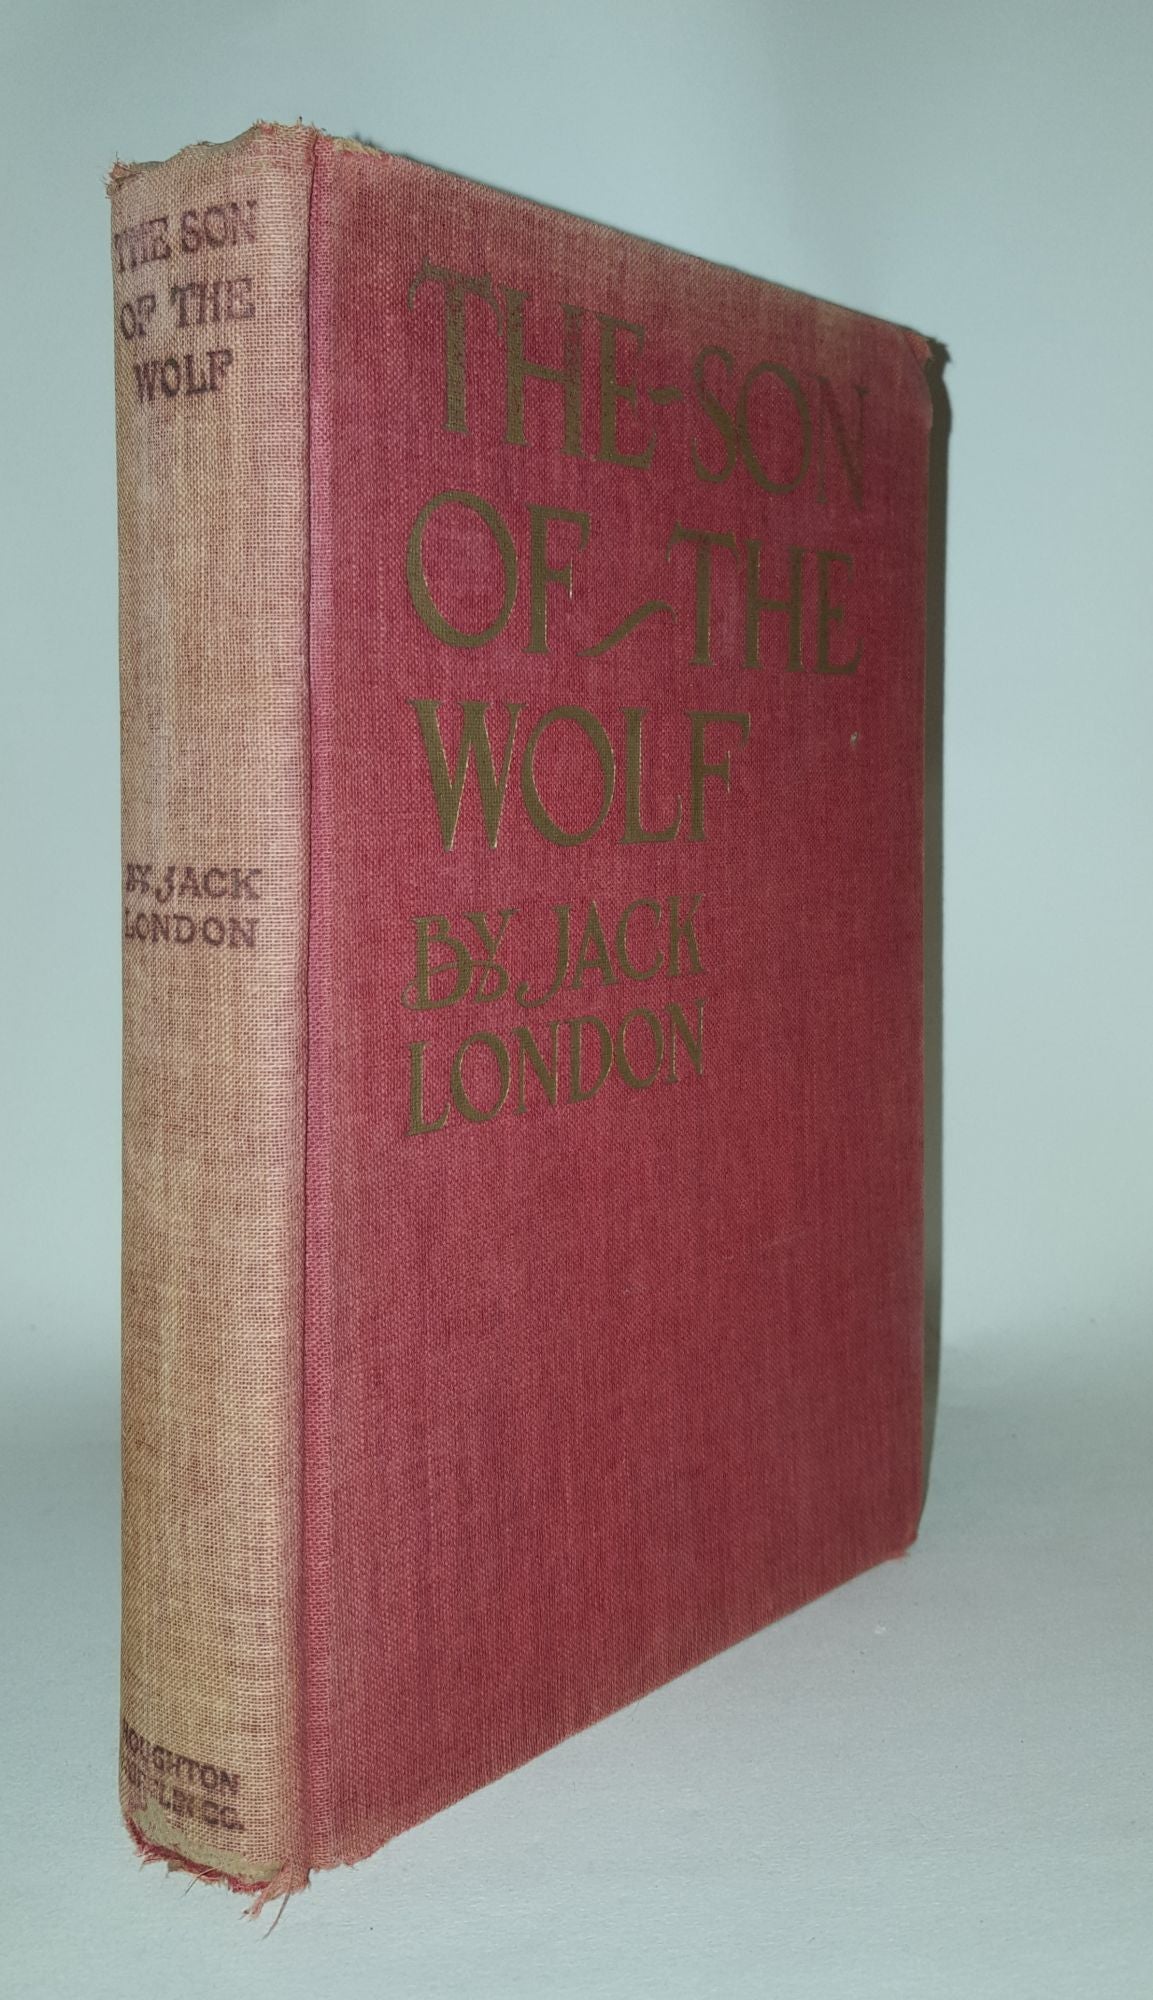 LONDON Jack - The Son of the Wolf Tales of the Far North